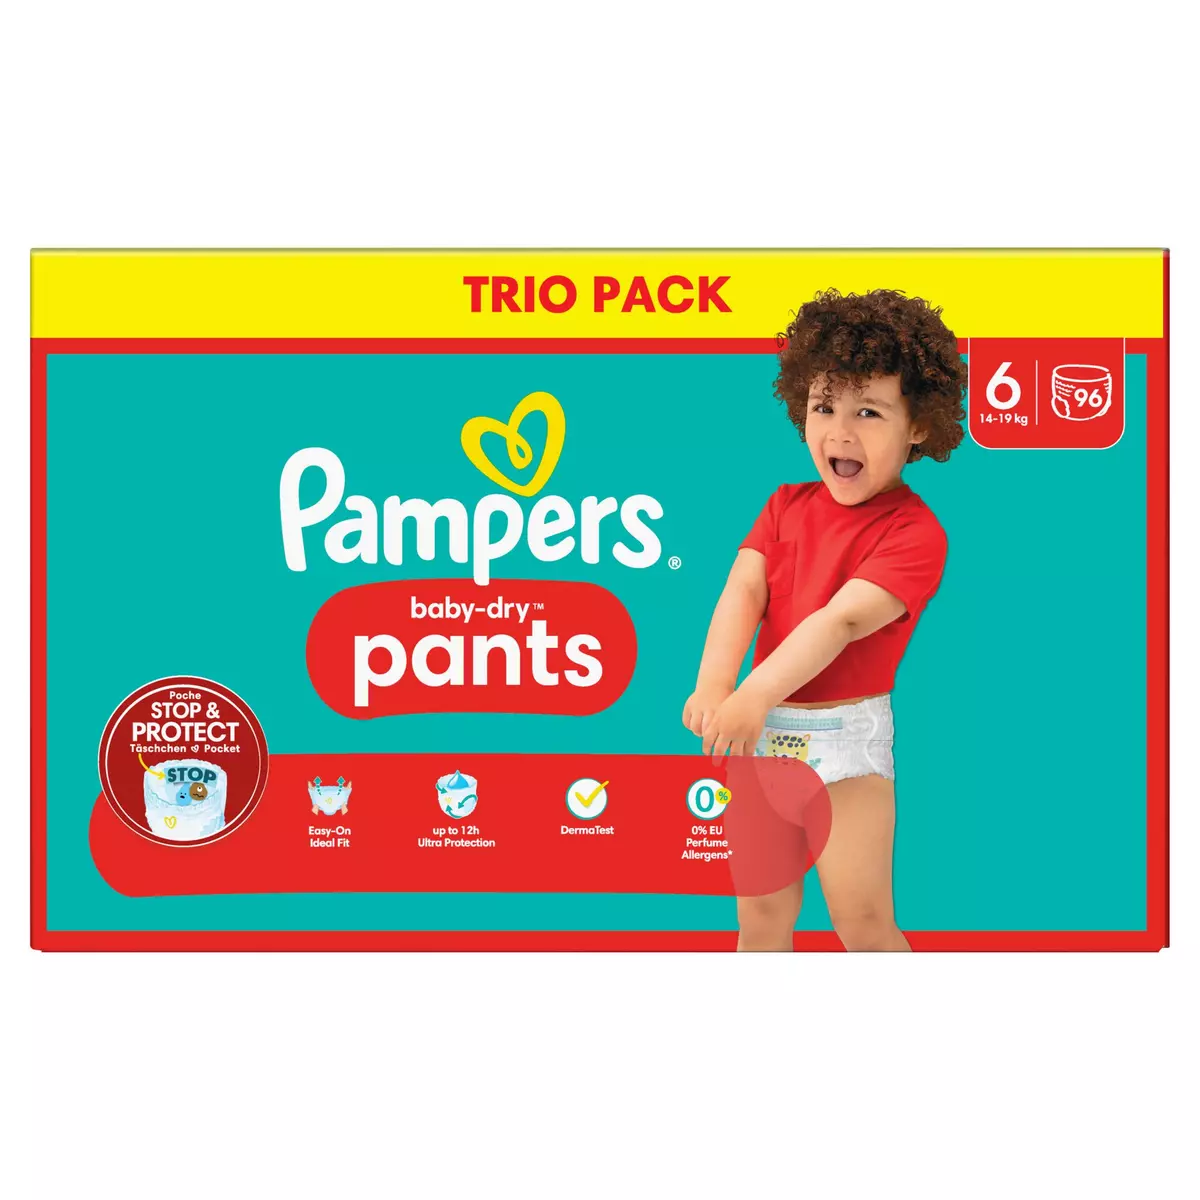 PAMPERS Baby-Dry Night Pants pour la nuit Taille 5 - 36 Couches-culottes